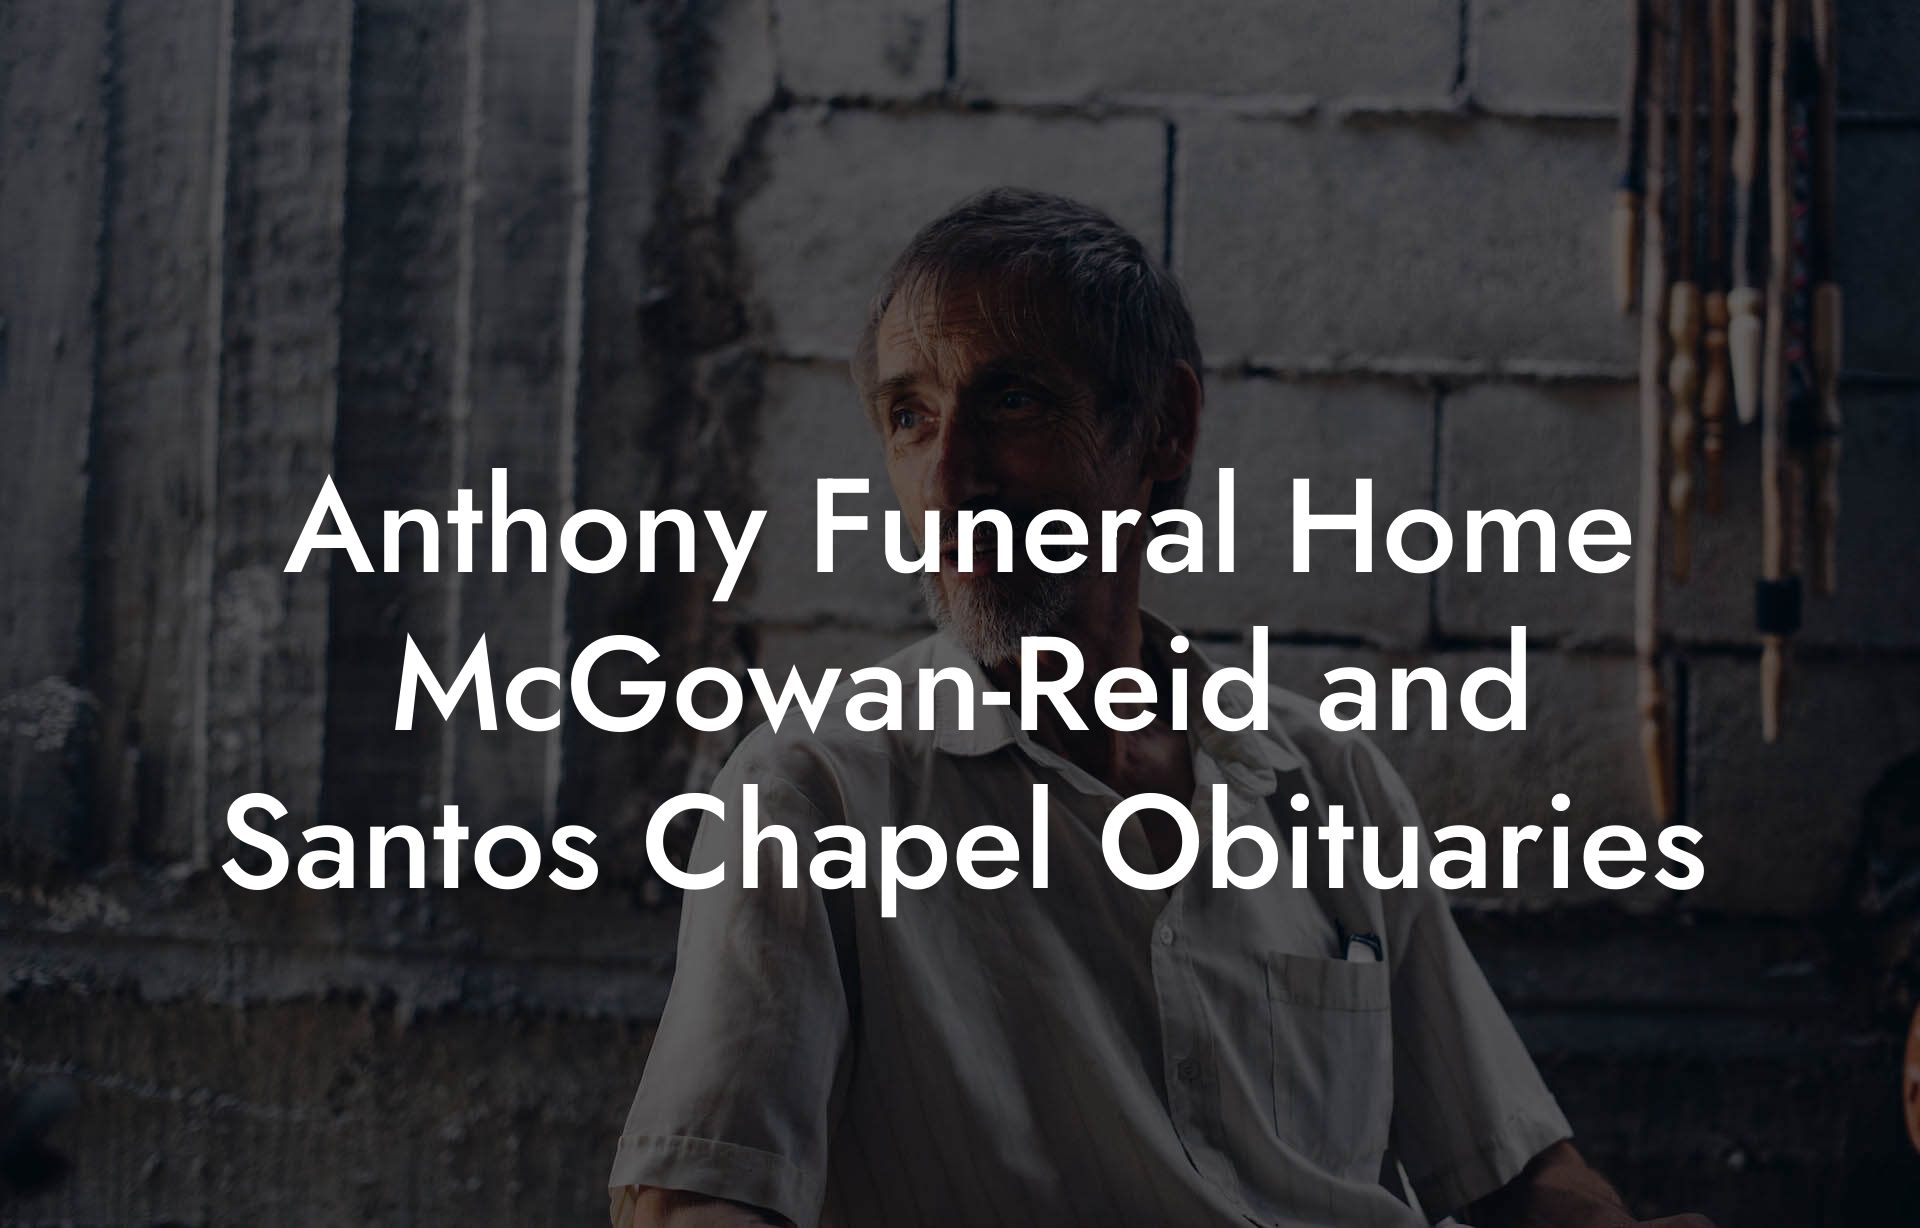 Anthony Funeral Home McGowan-Reid and Santos Chapel Obituaries